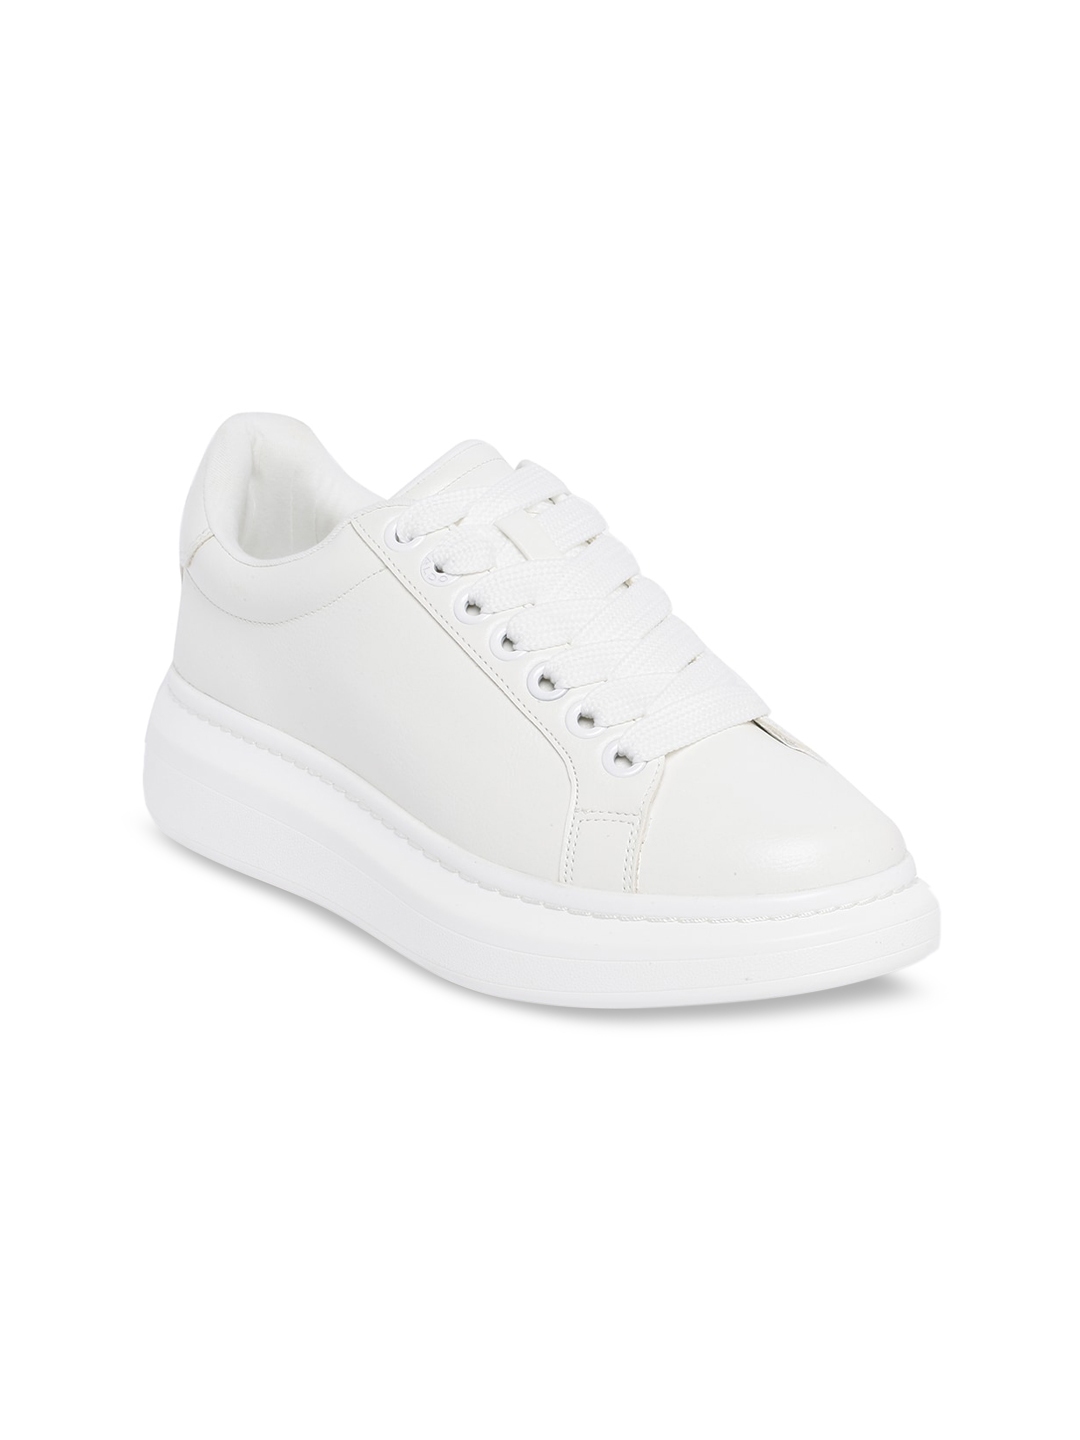 Buy ALDO Women White Solid Sneakers - Casual Shoes for Women 13782632 ...